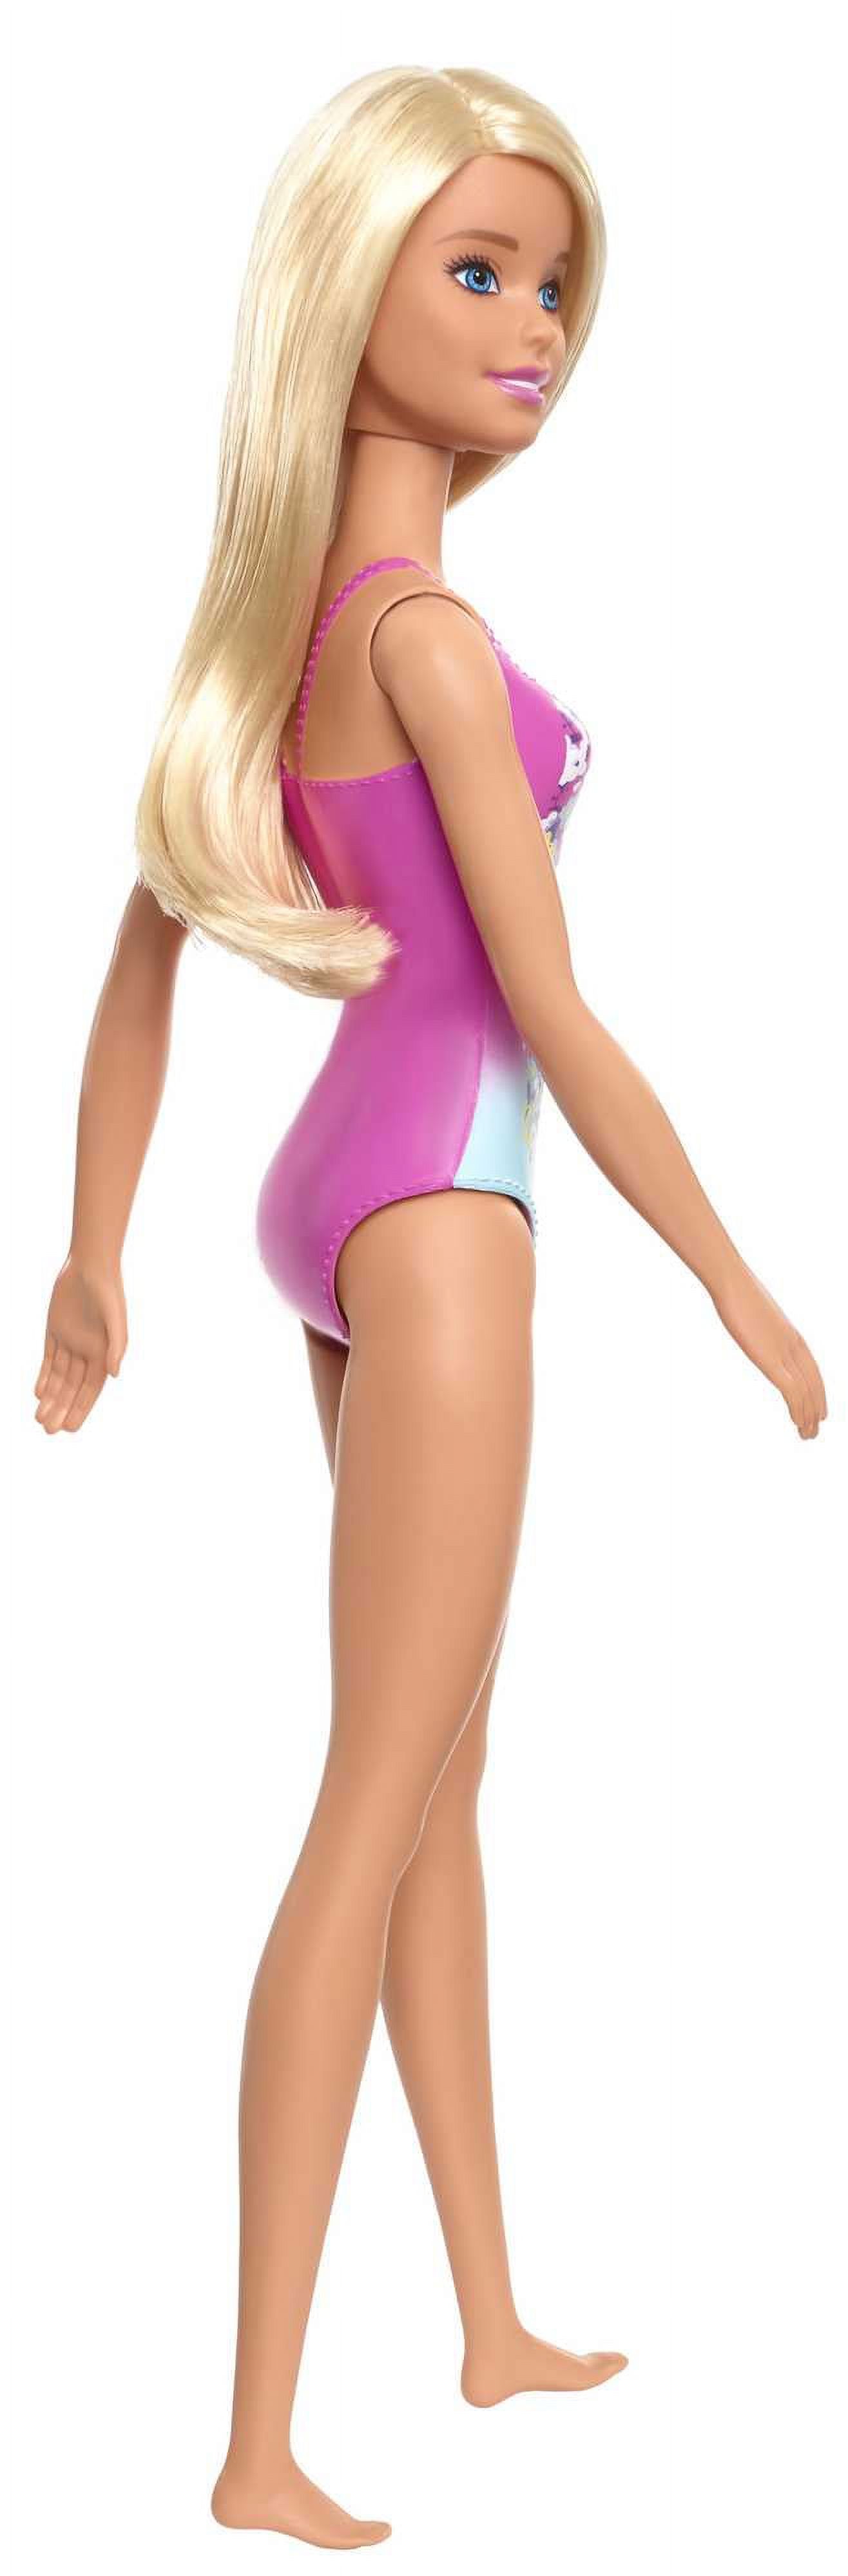 Barbie Swimsuit Beach Doll with Blonde Hair & Pink Floral Print Suit - image 5 of 6